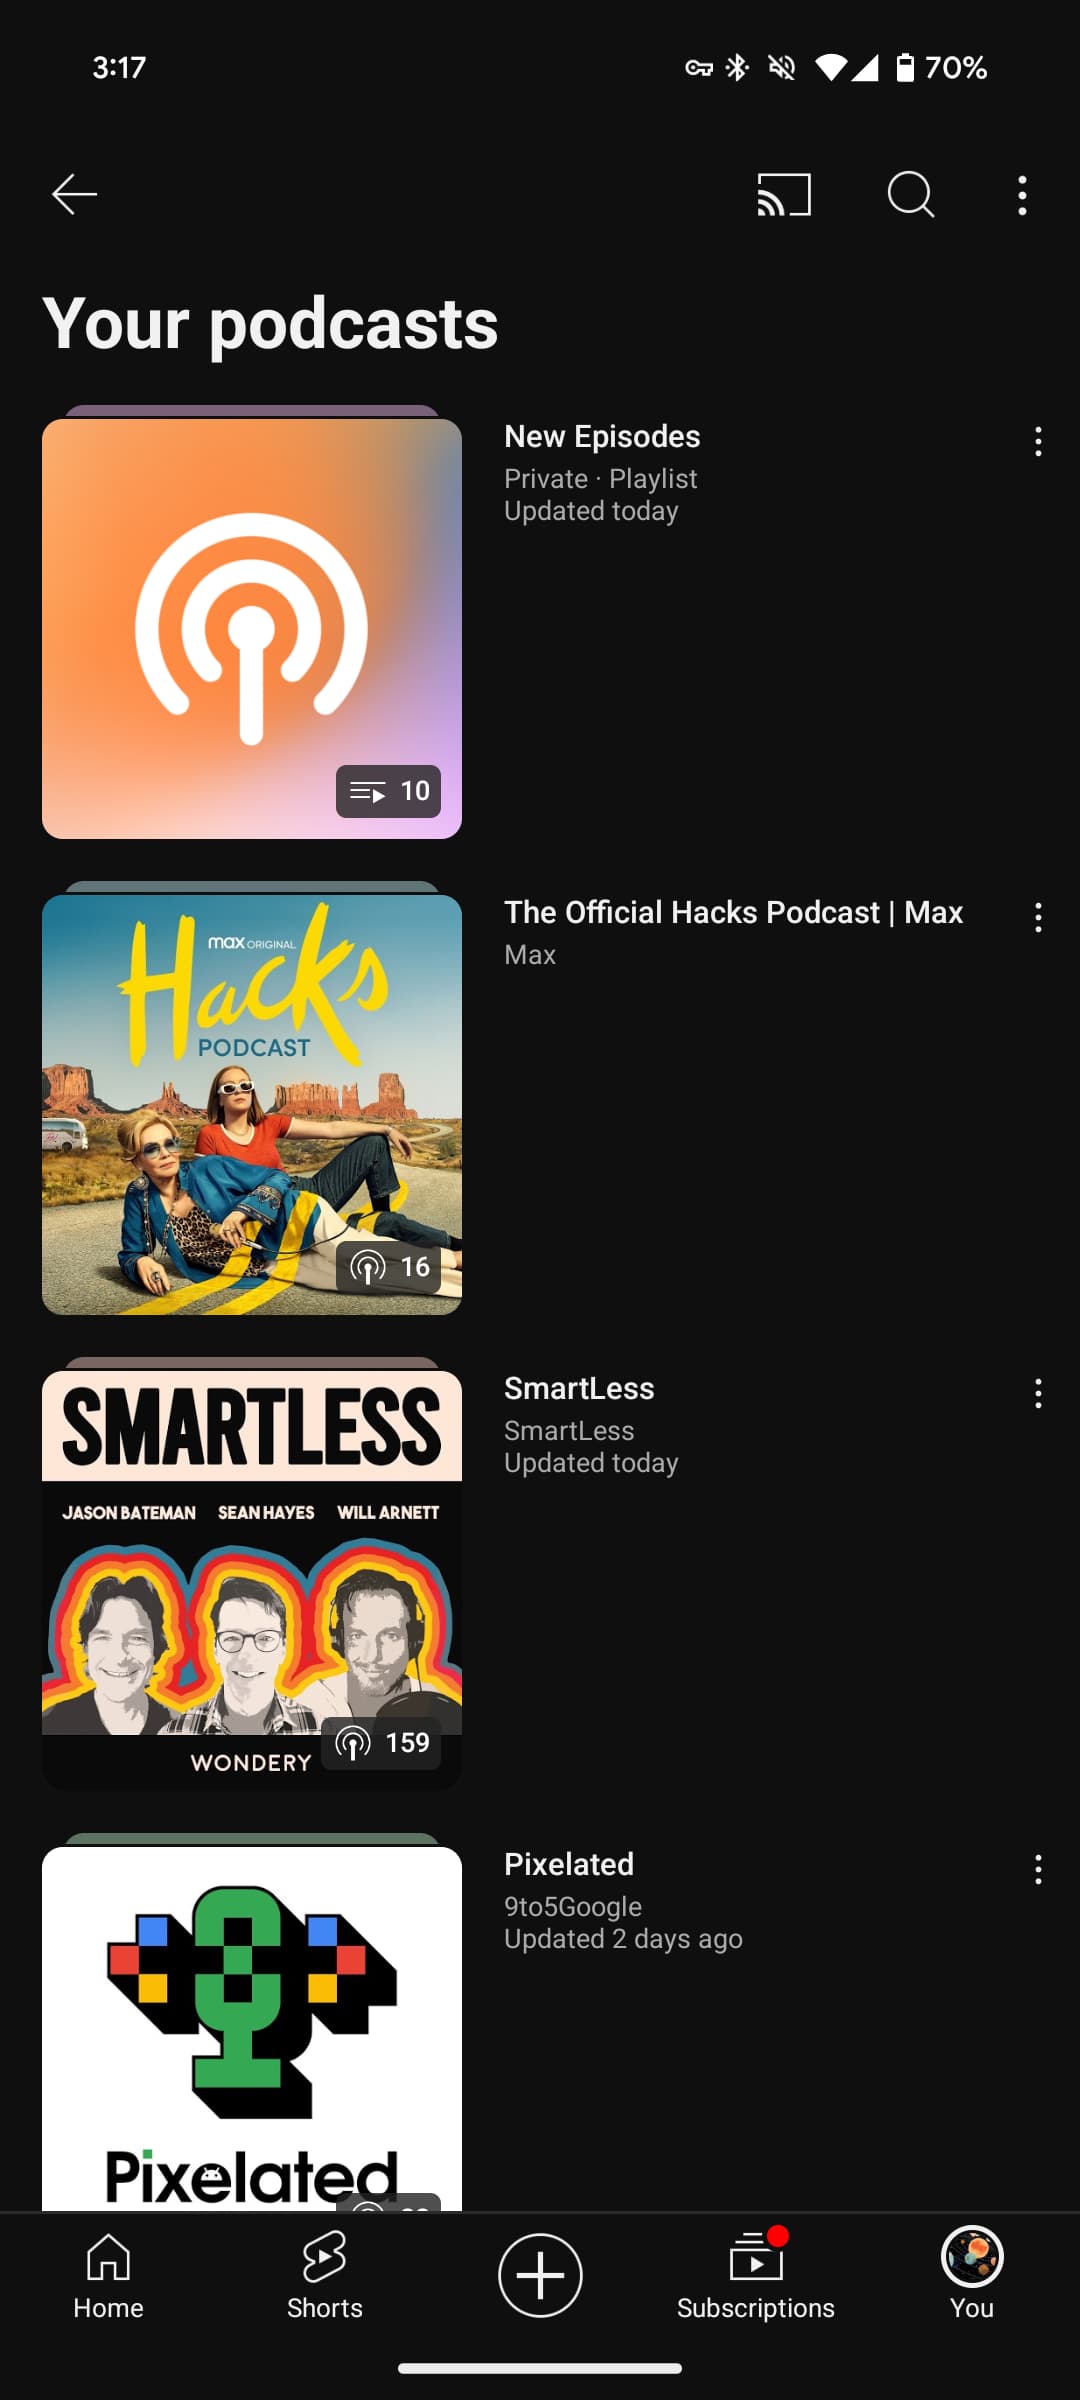 YouTube Your podcasts